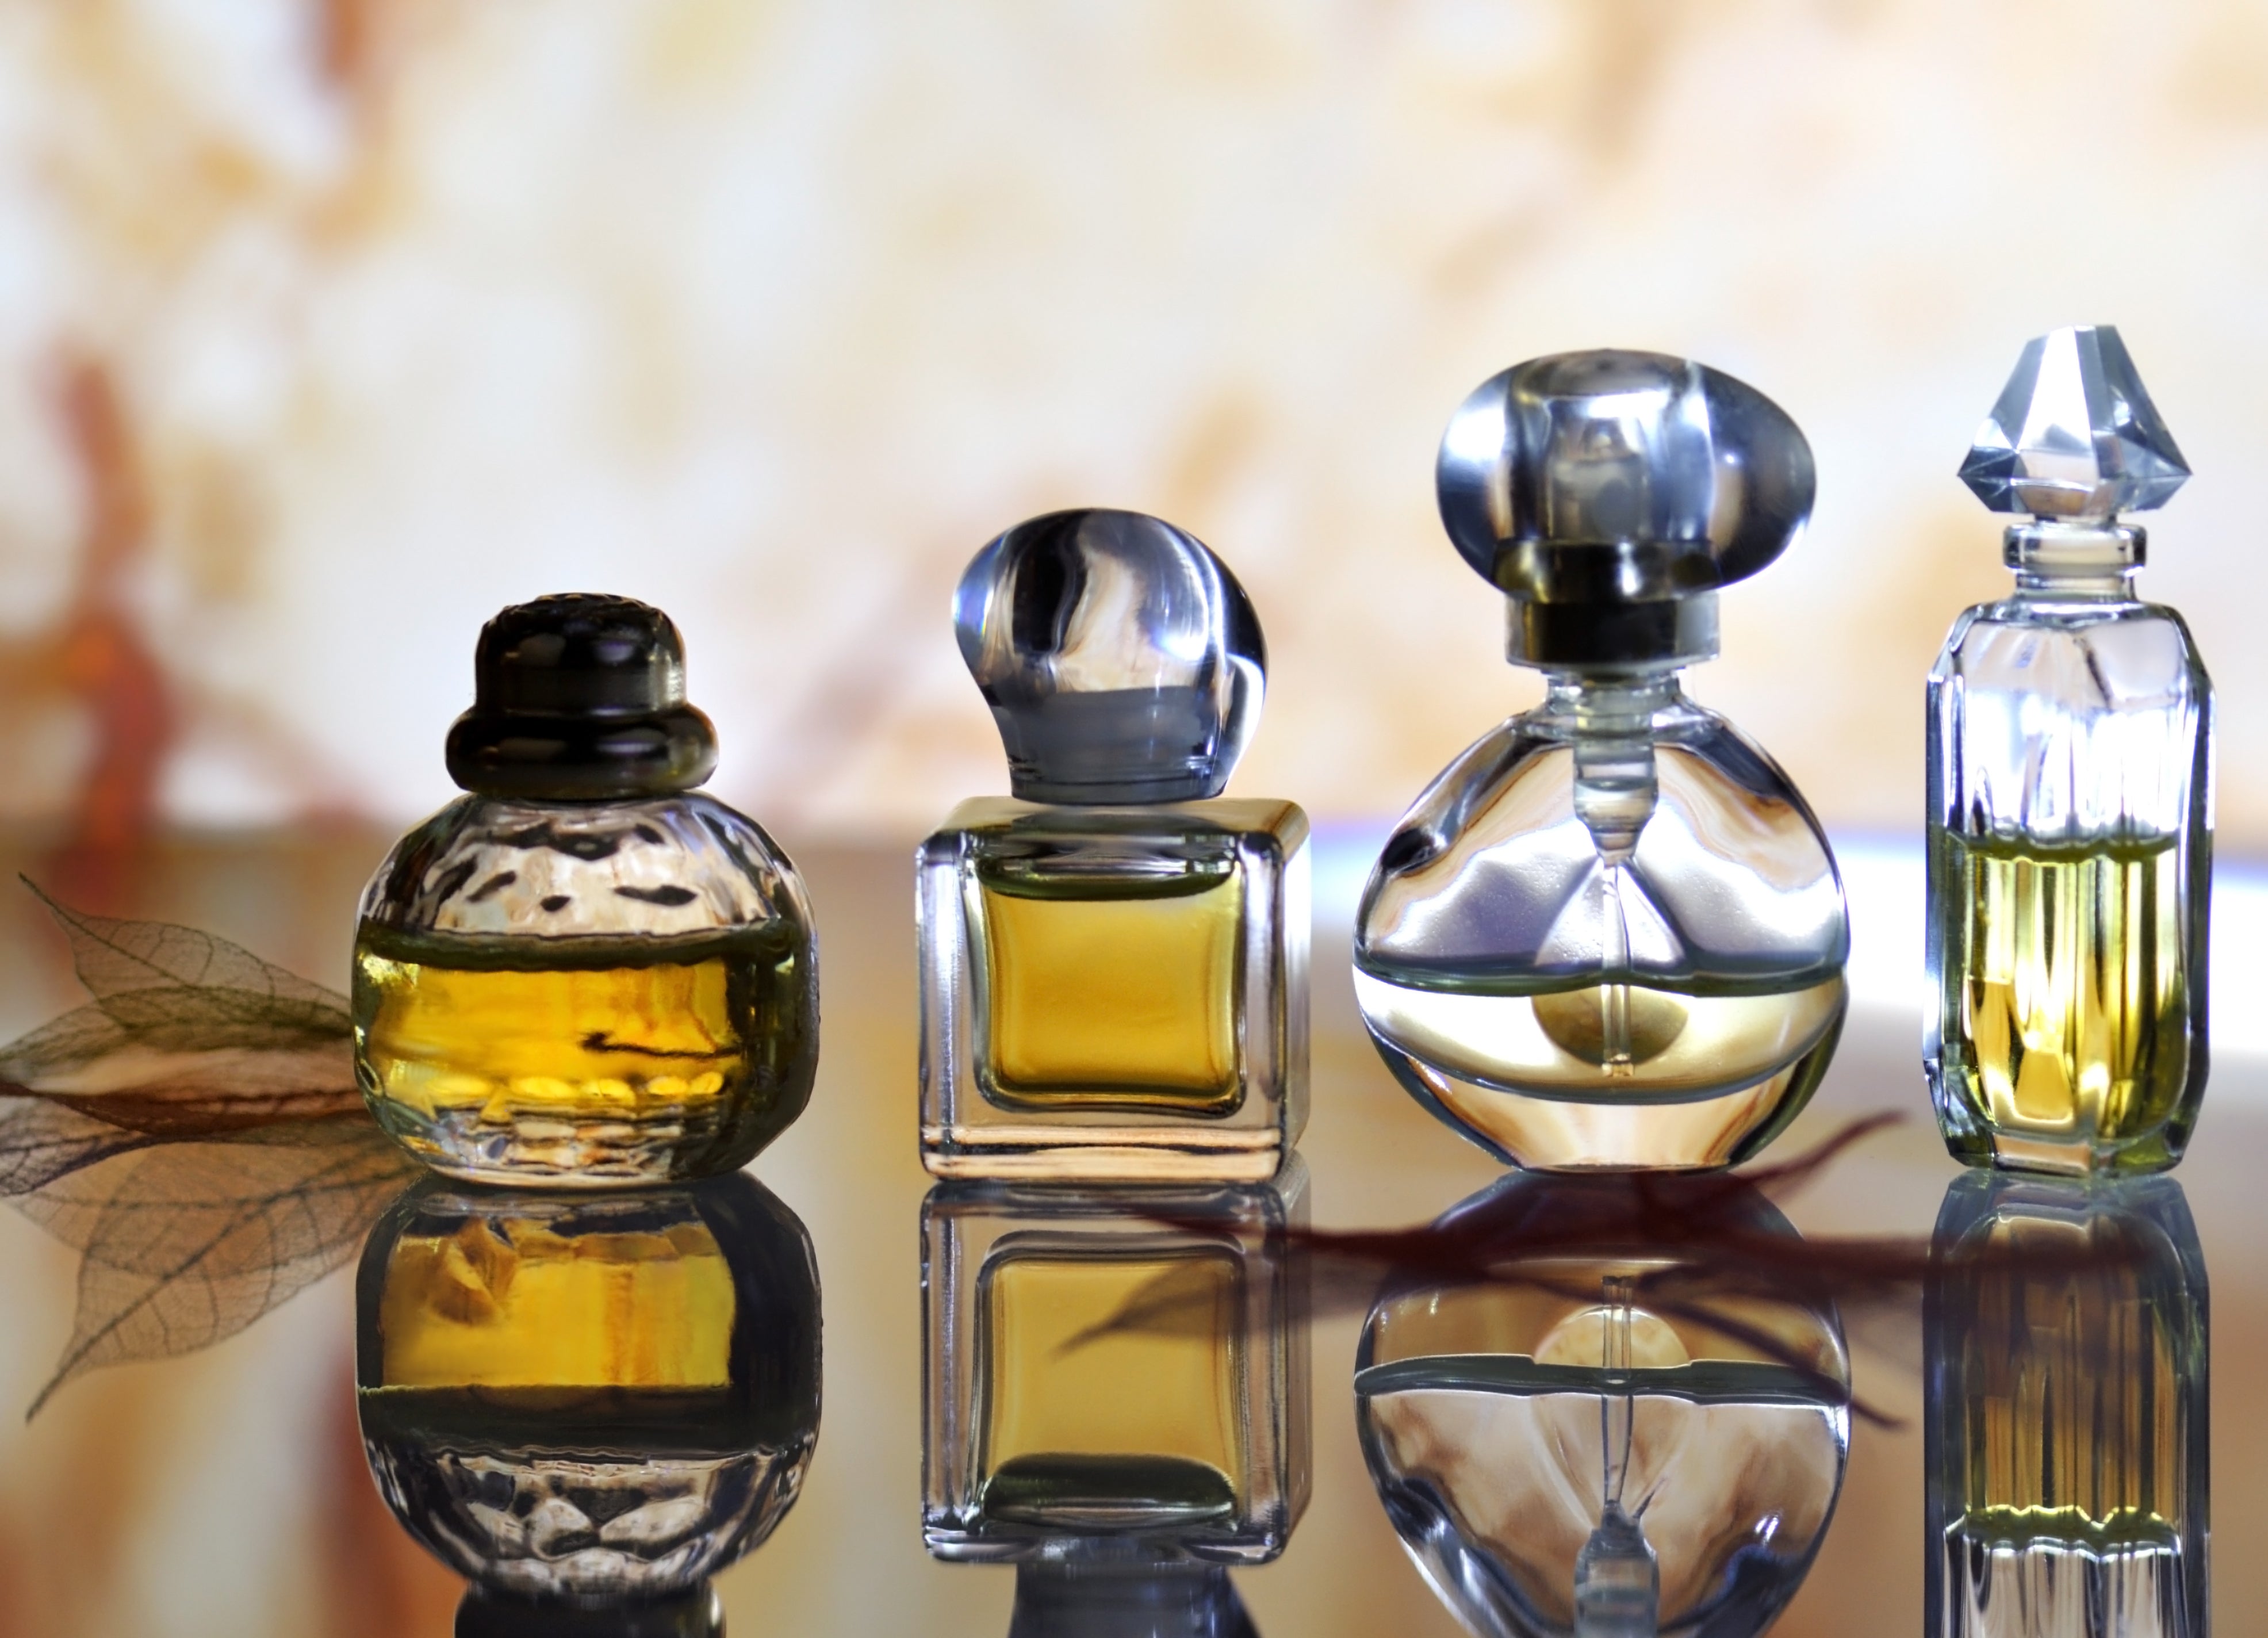 Does your perfume match your personality? – Les Senteurs